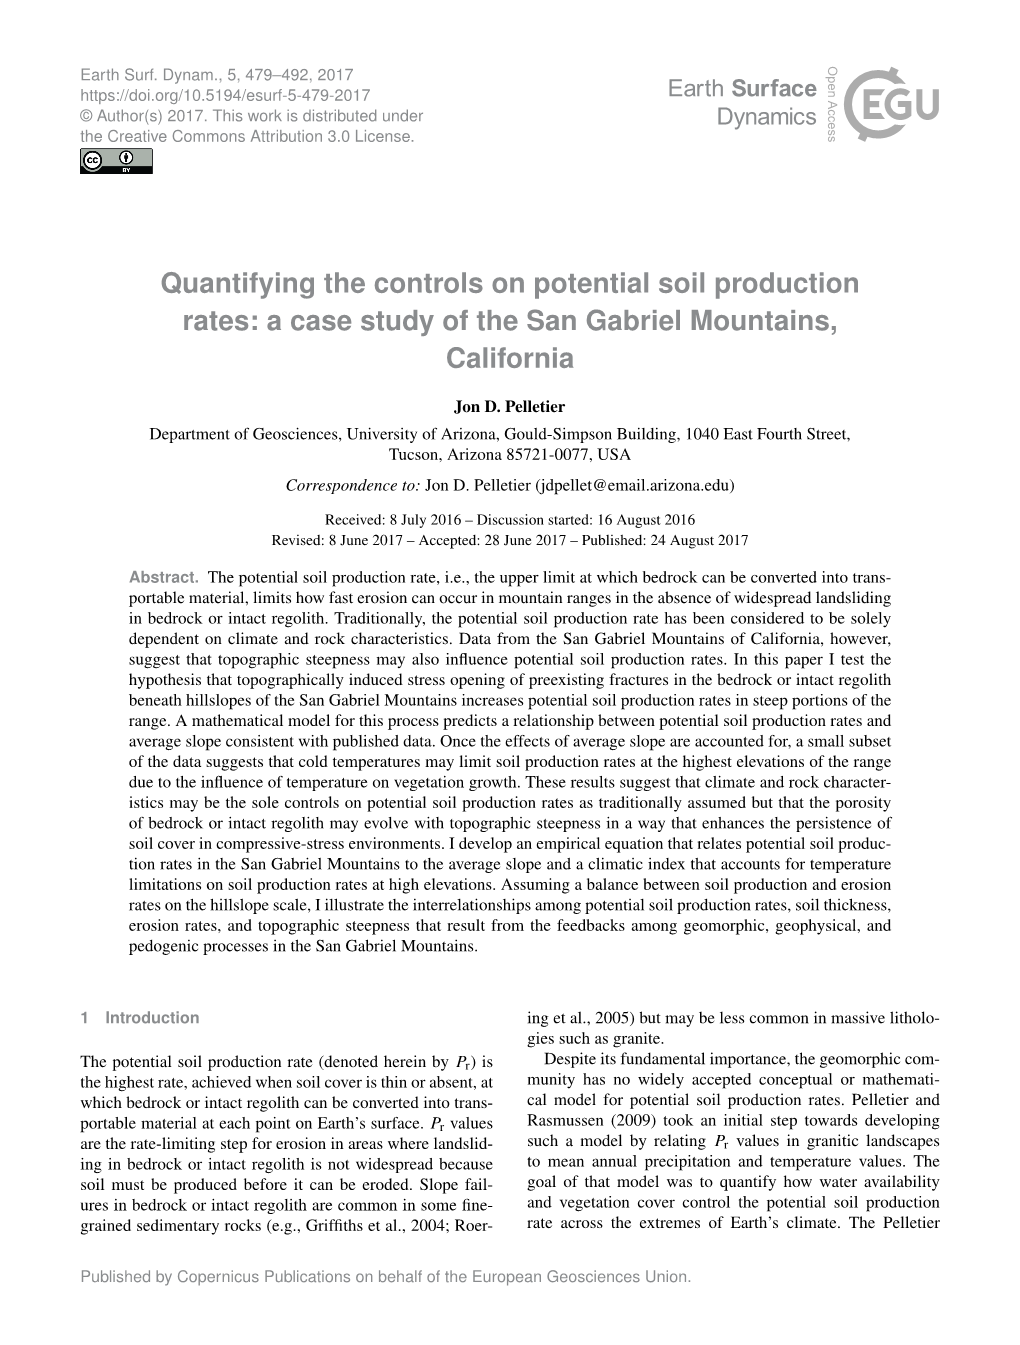 Quantifying the Controls on Potential Soil Production Rates: a Case Study of the San Gabriel Mountains, California